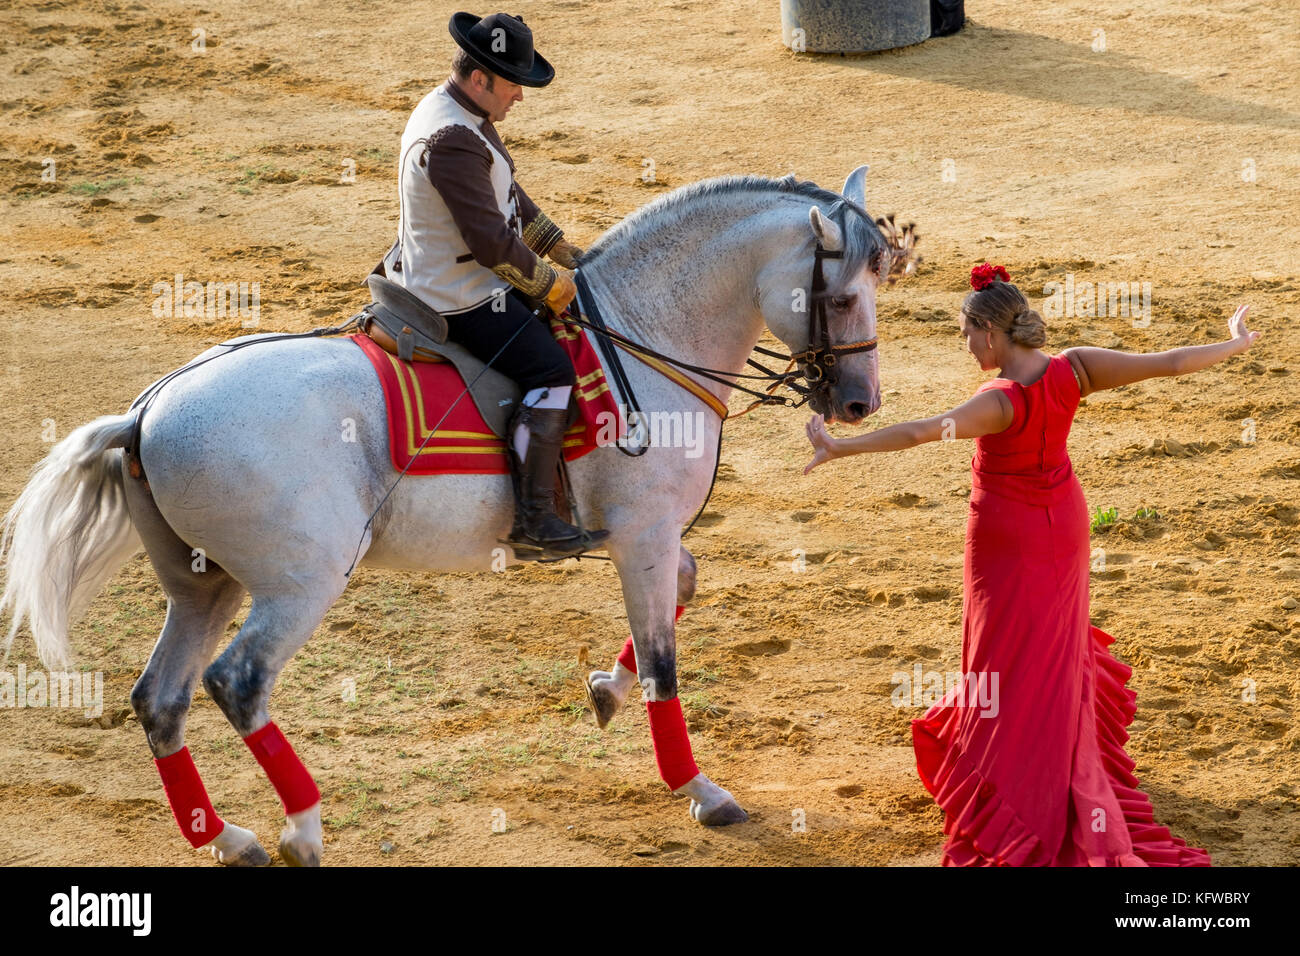 Andalusian dancing horse and rider in performance with a flamenco dancer. Andalusia, Spain Stock Photo